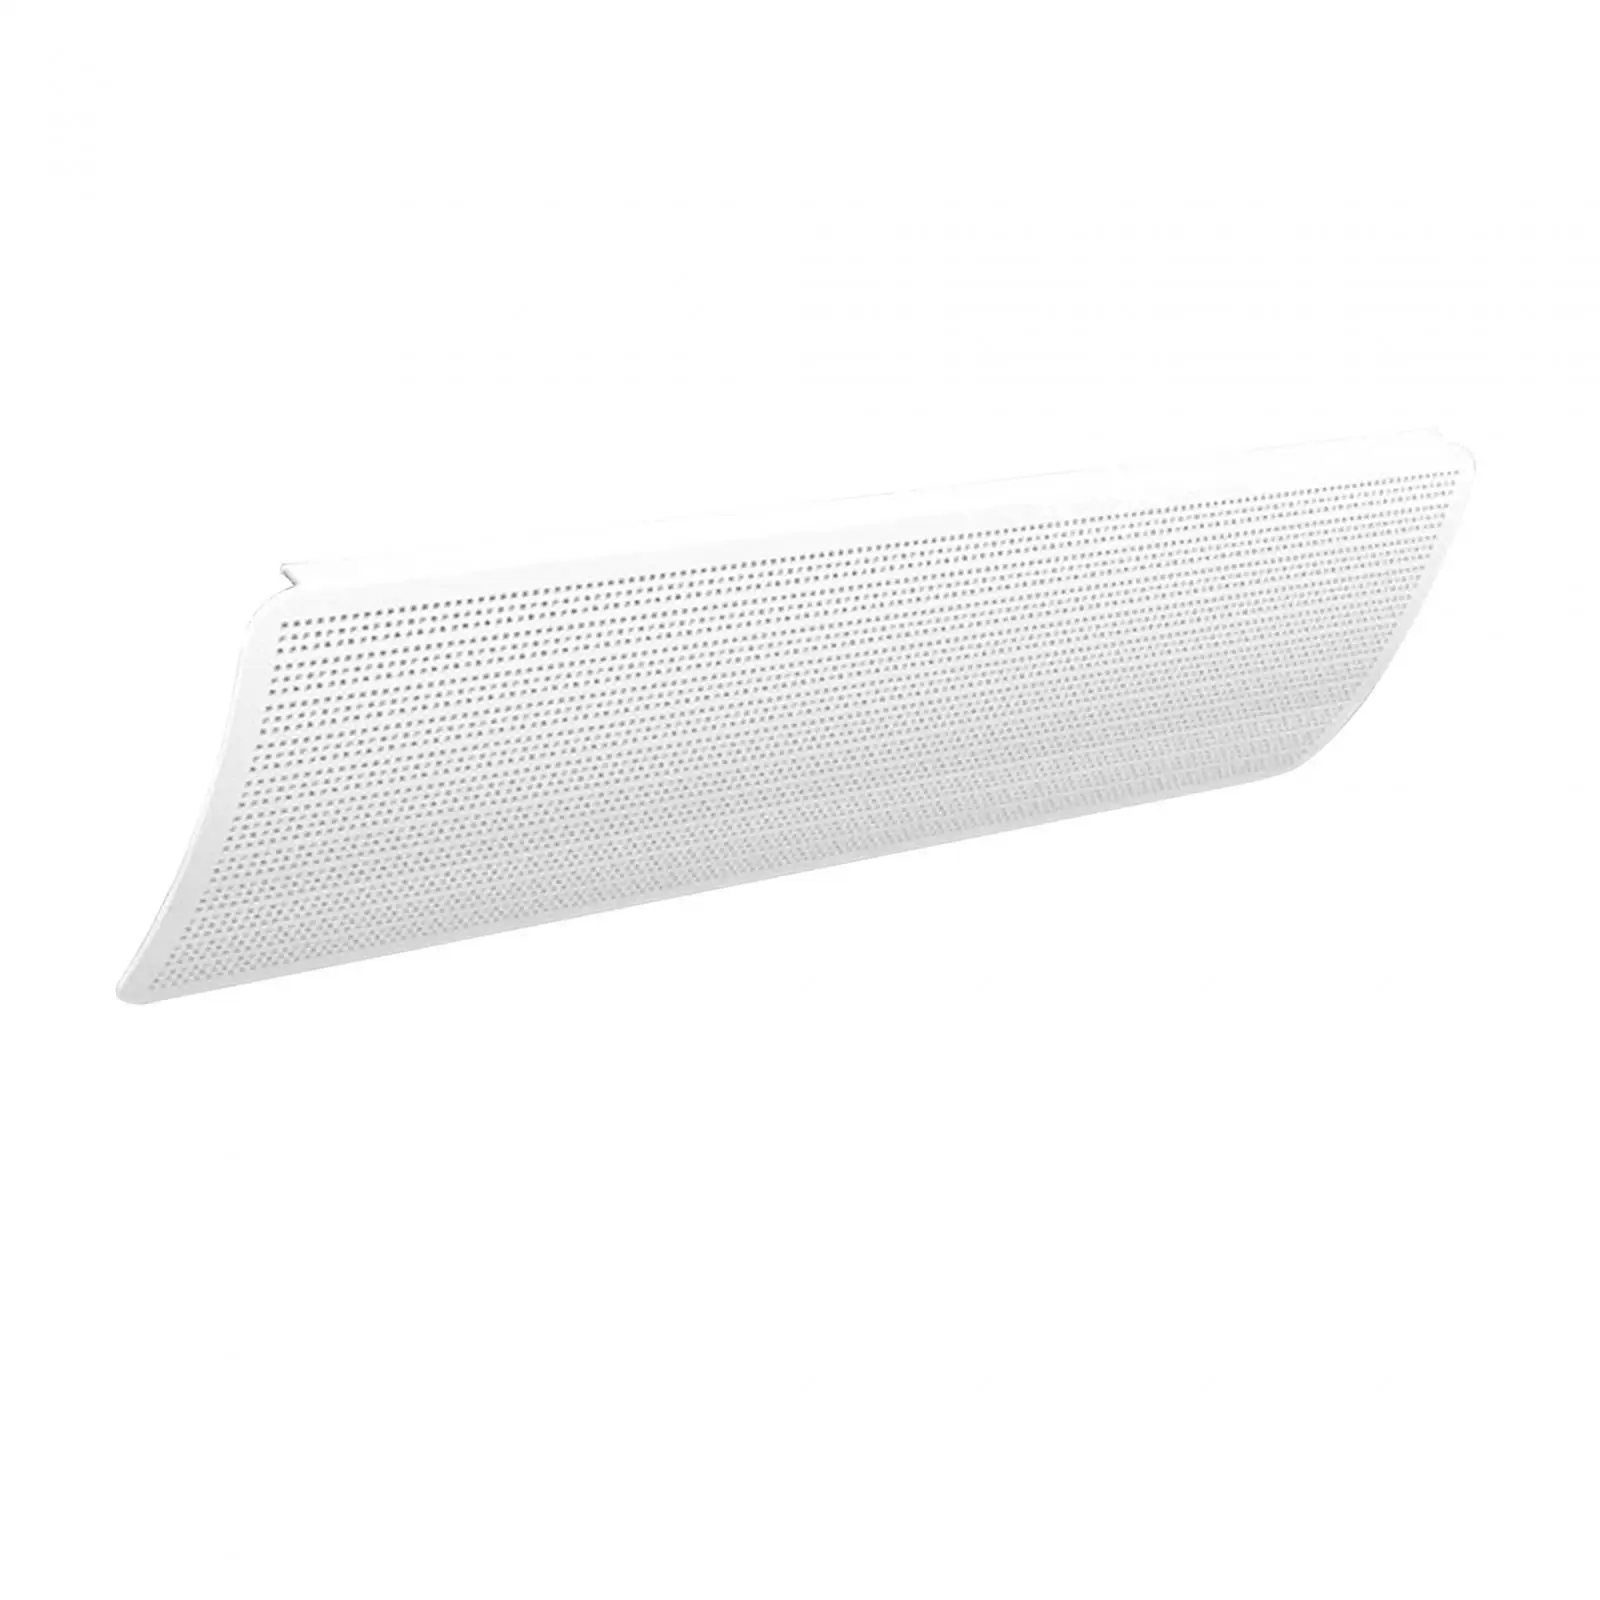 Central air conditioning, air deflector, vent deflector, wind guide cover,